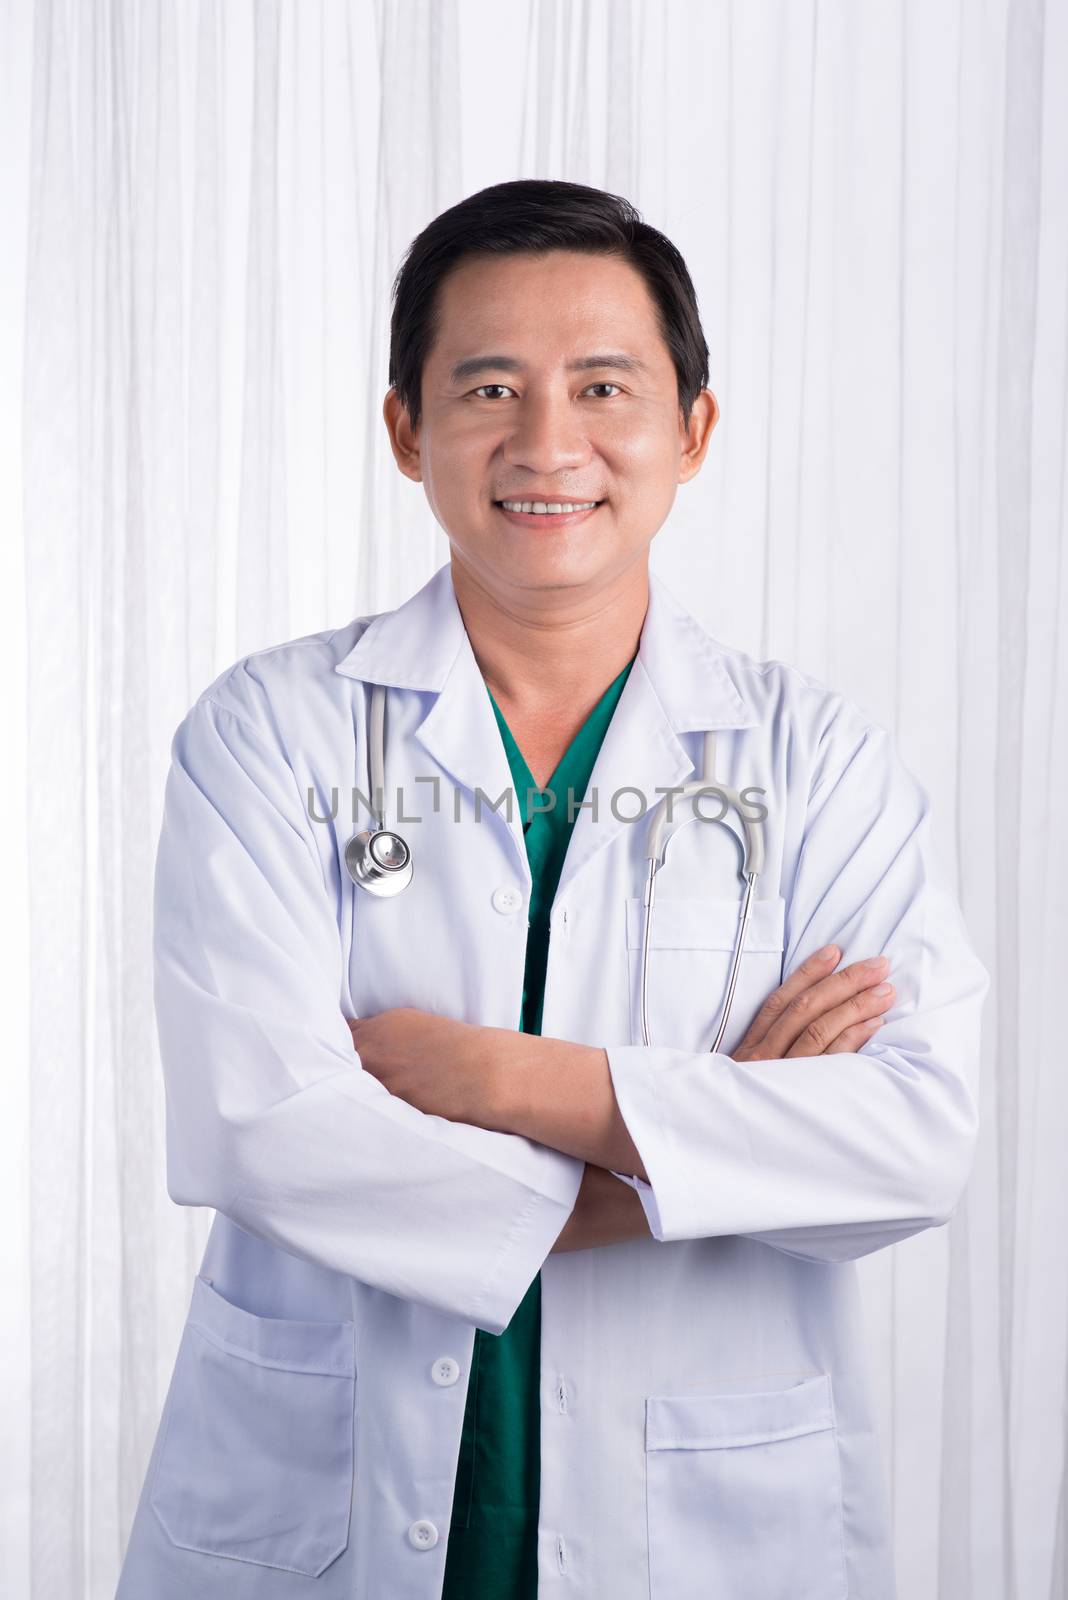 Male Doctor with stethoscope in a hospital